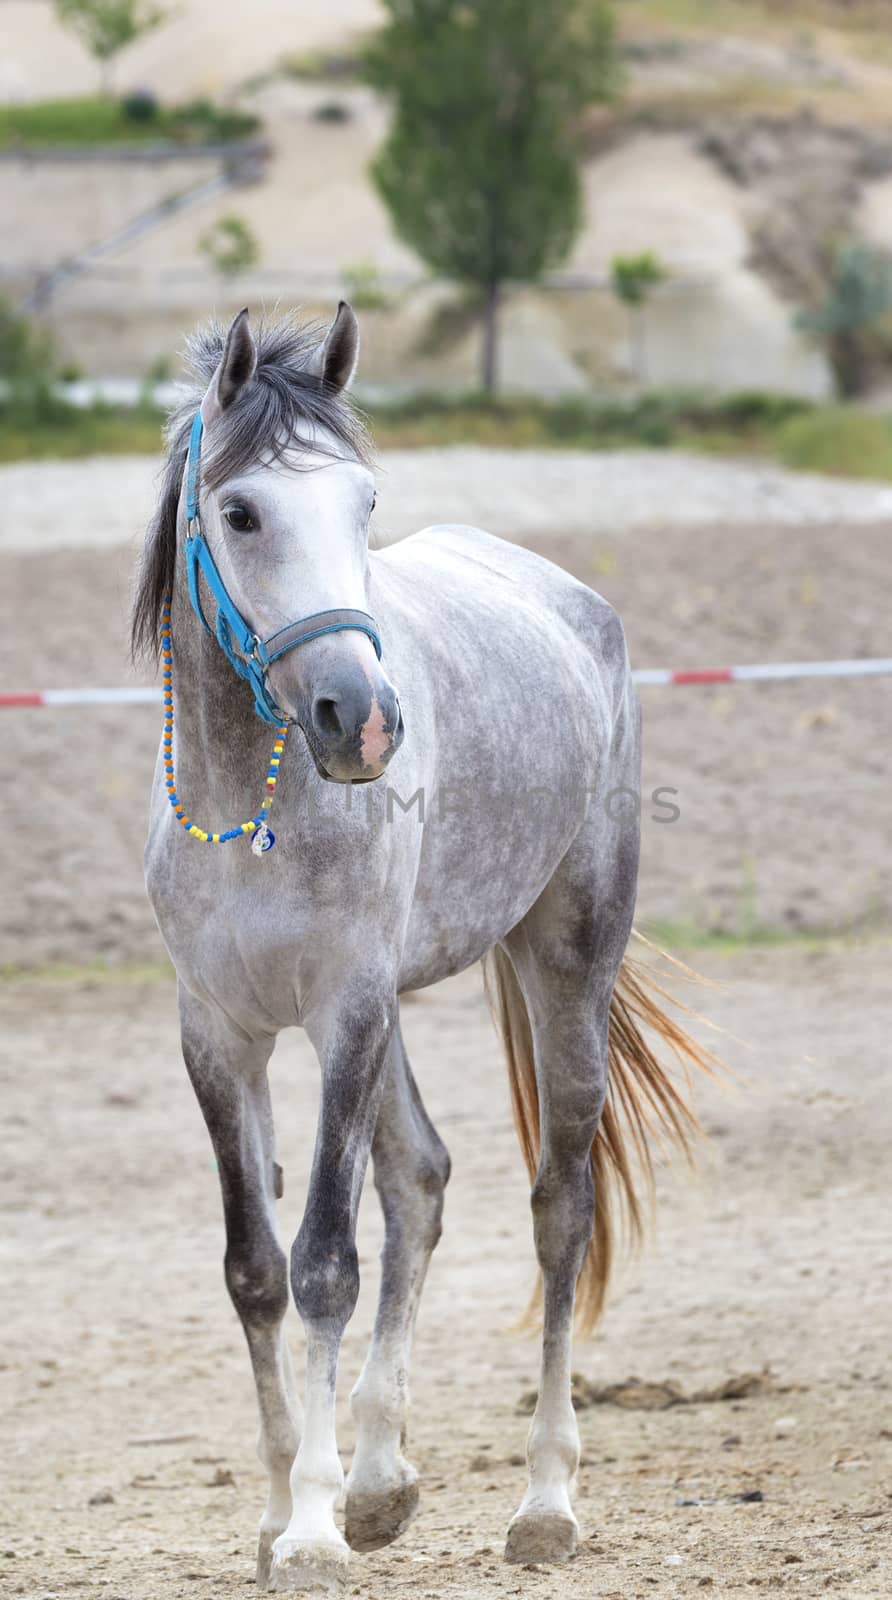 A young gray horse with a bright turquoise bridle and round multicolored beads around his neck stands in the field